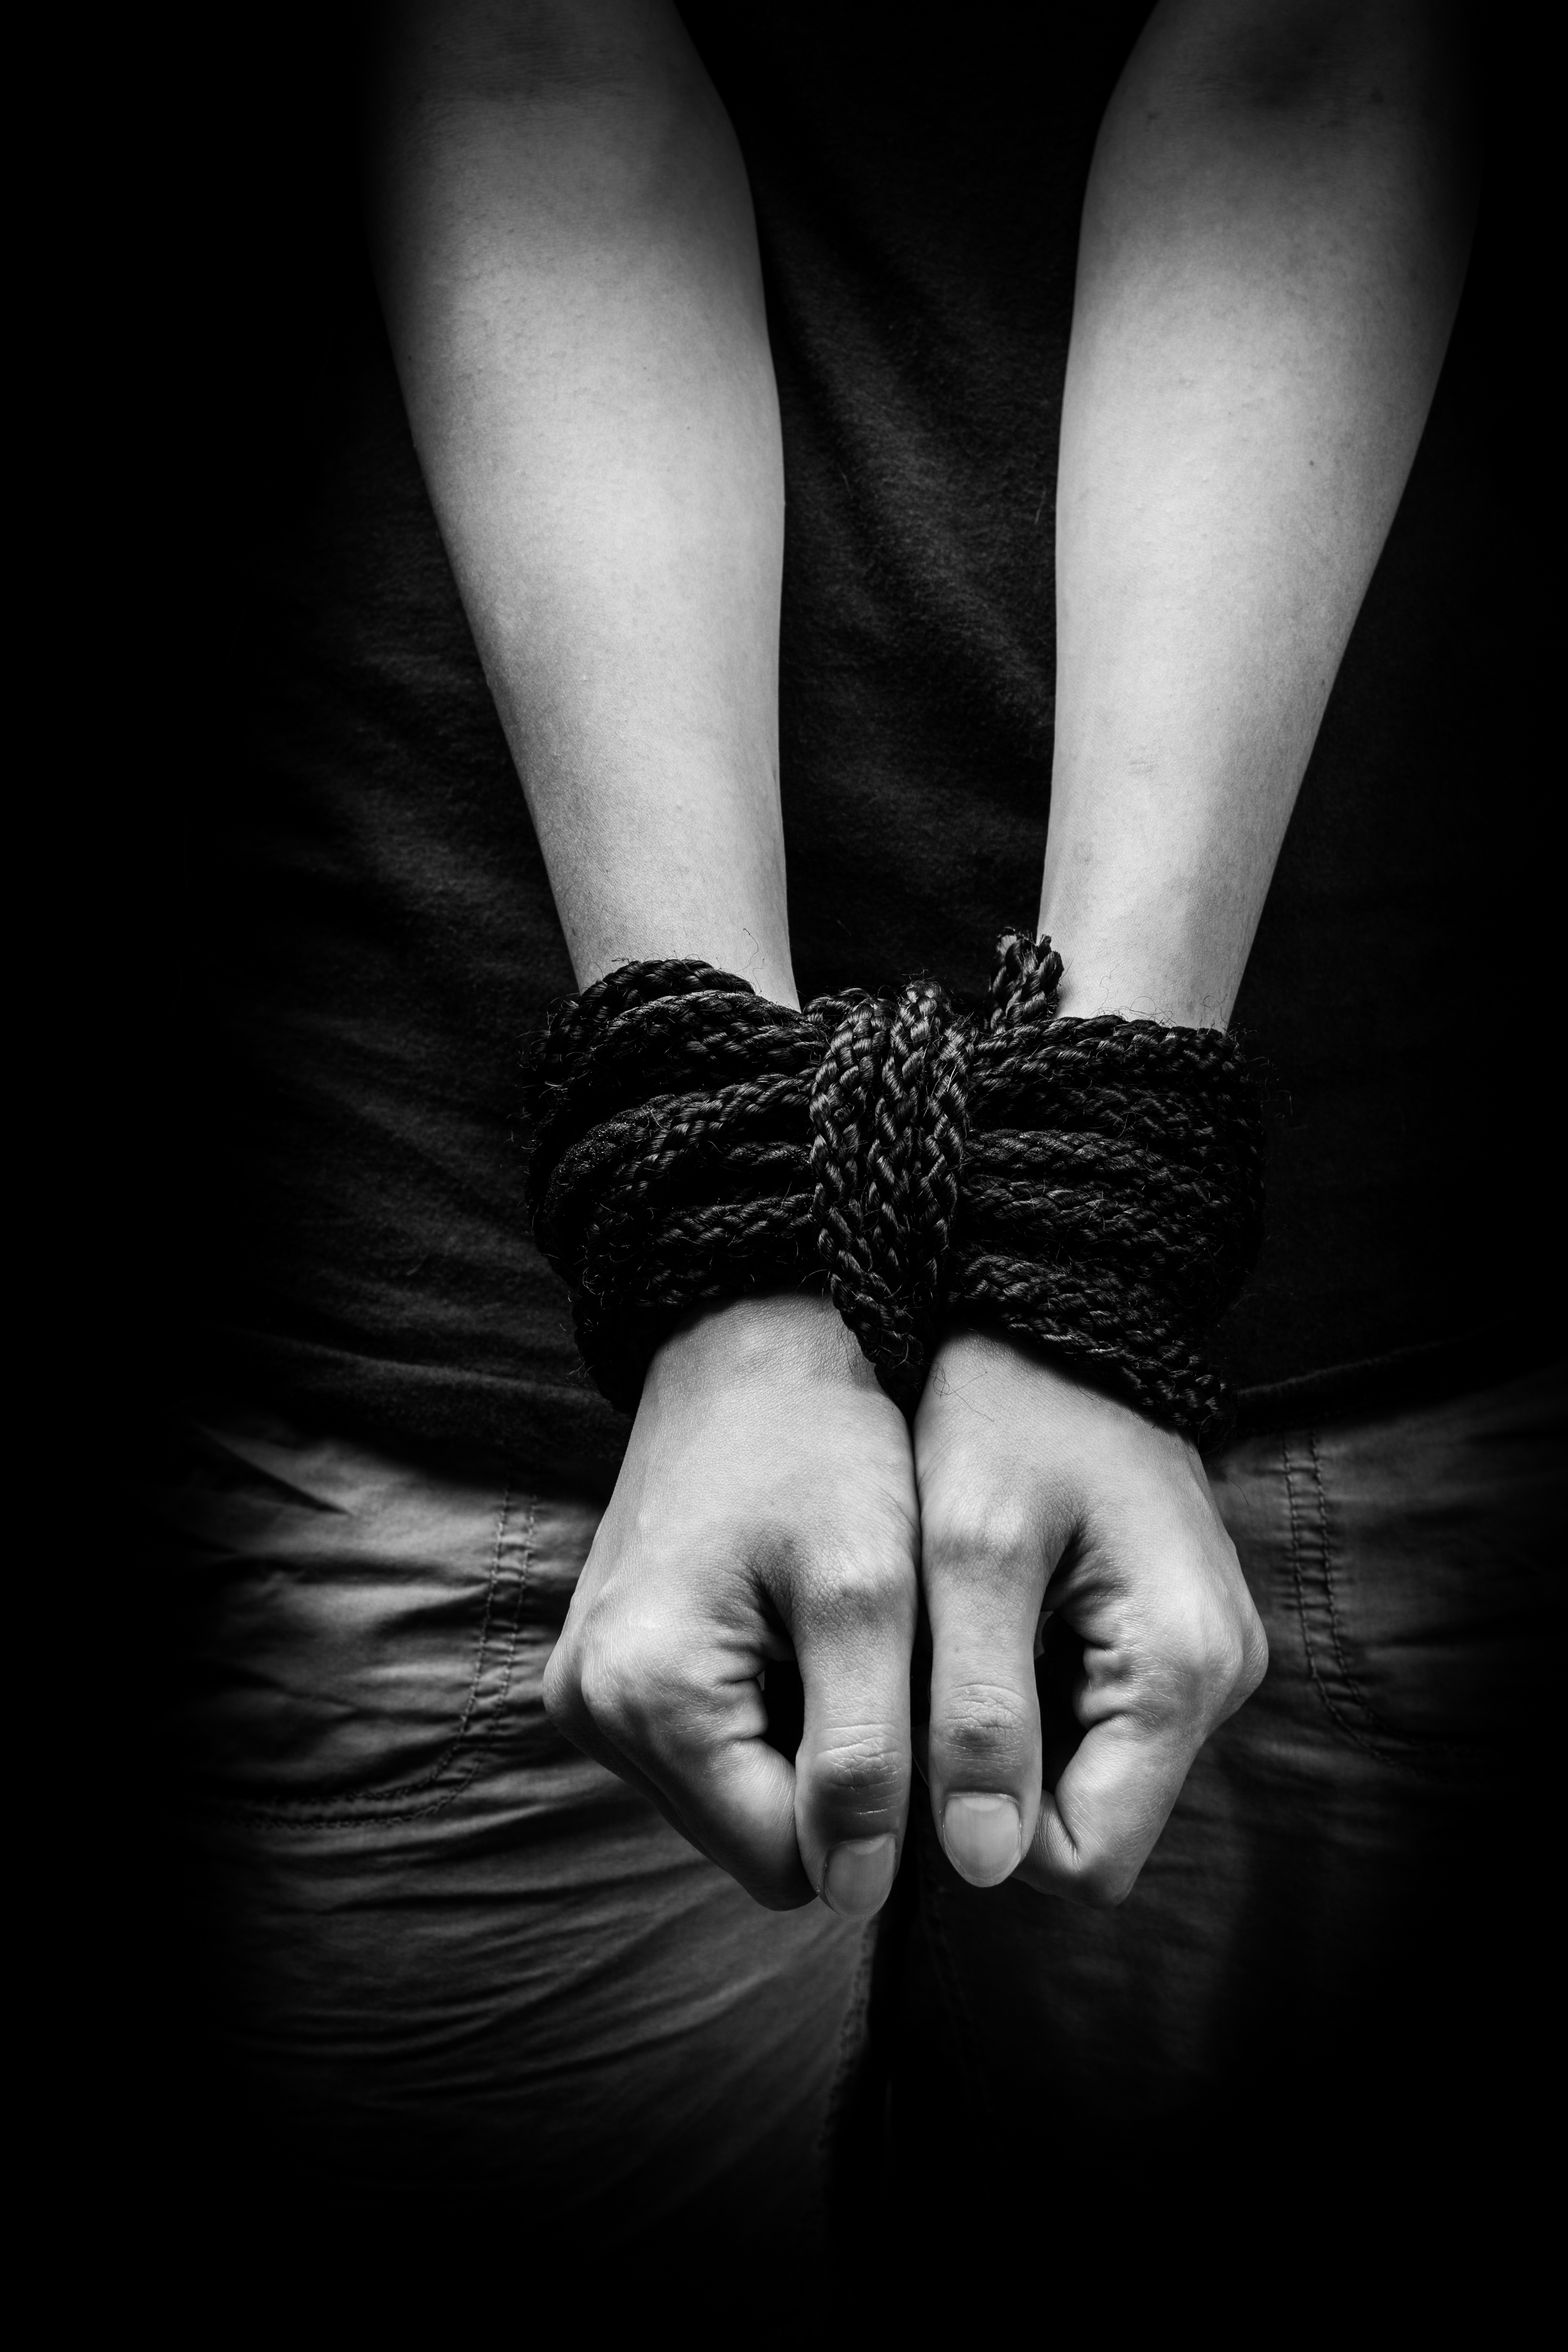 human hands tied with rope